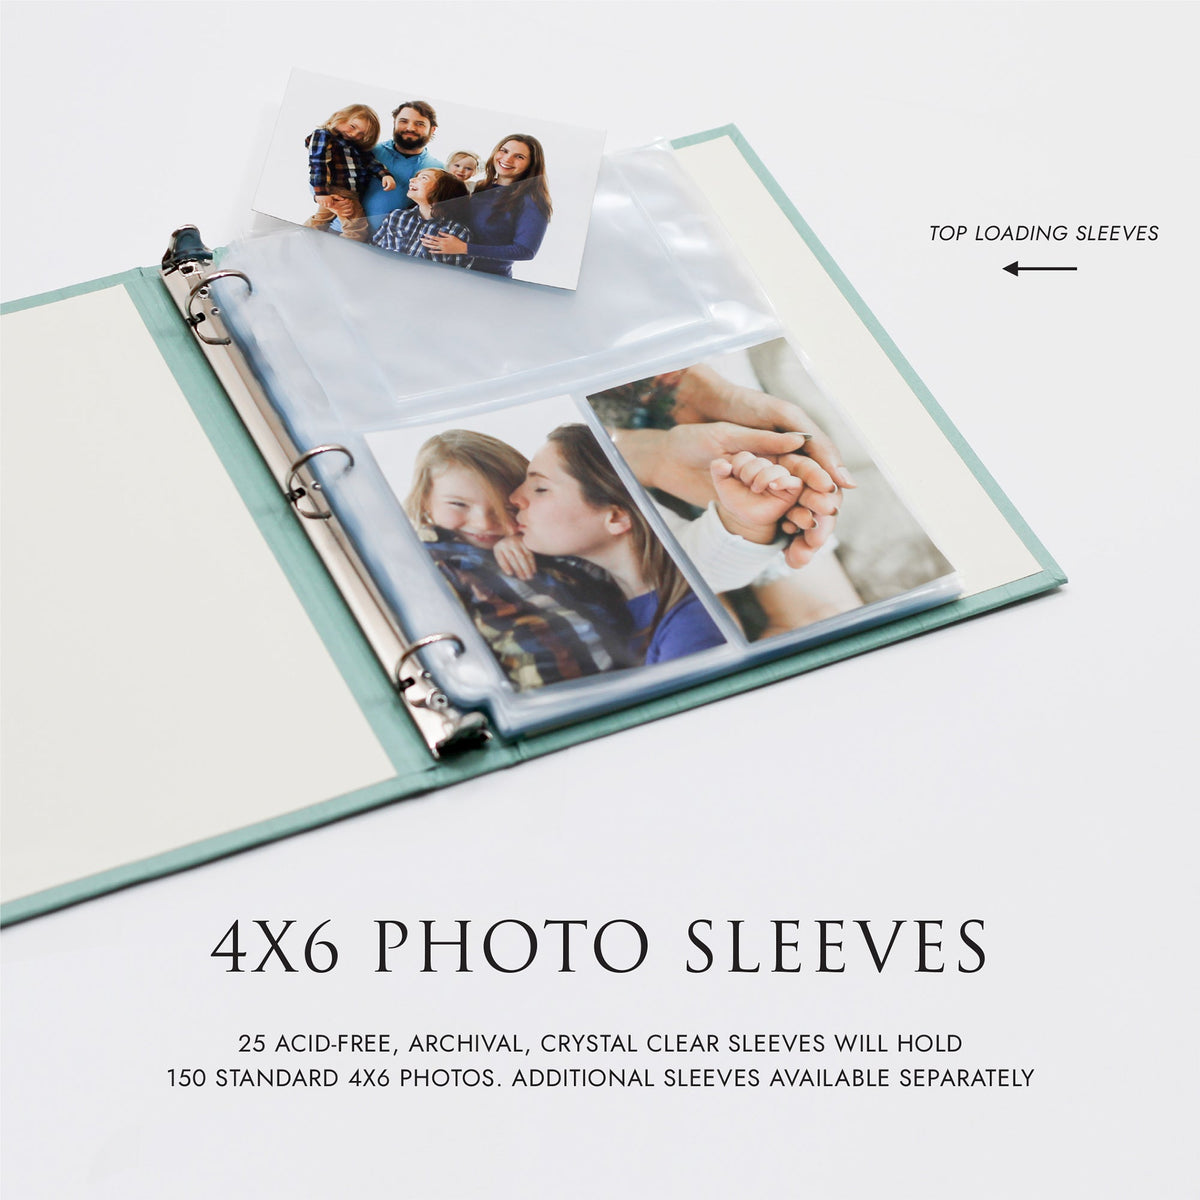 Large Photo Binder For 4x6 Photos | Cover: Mocha Vegan Leather | Available Personalized